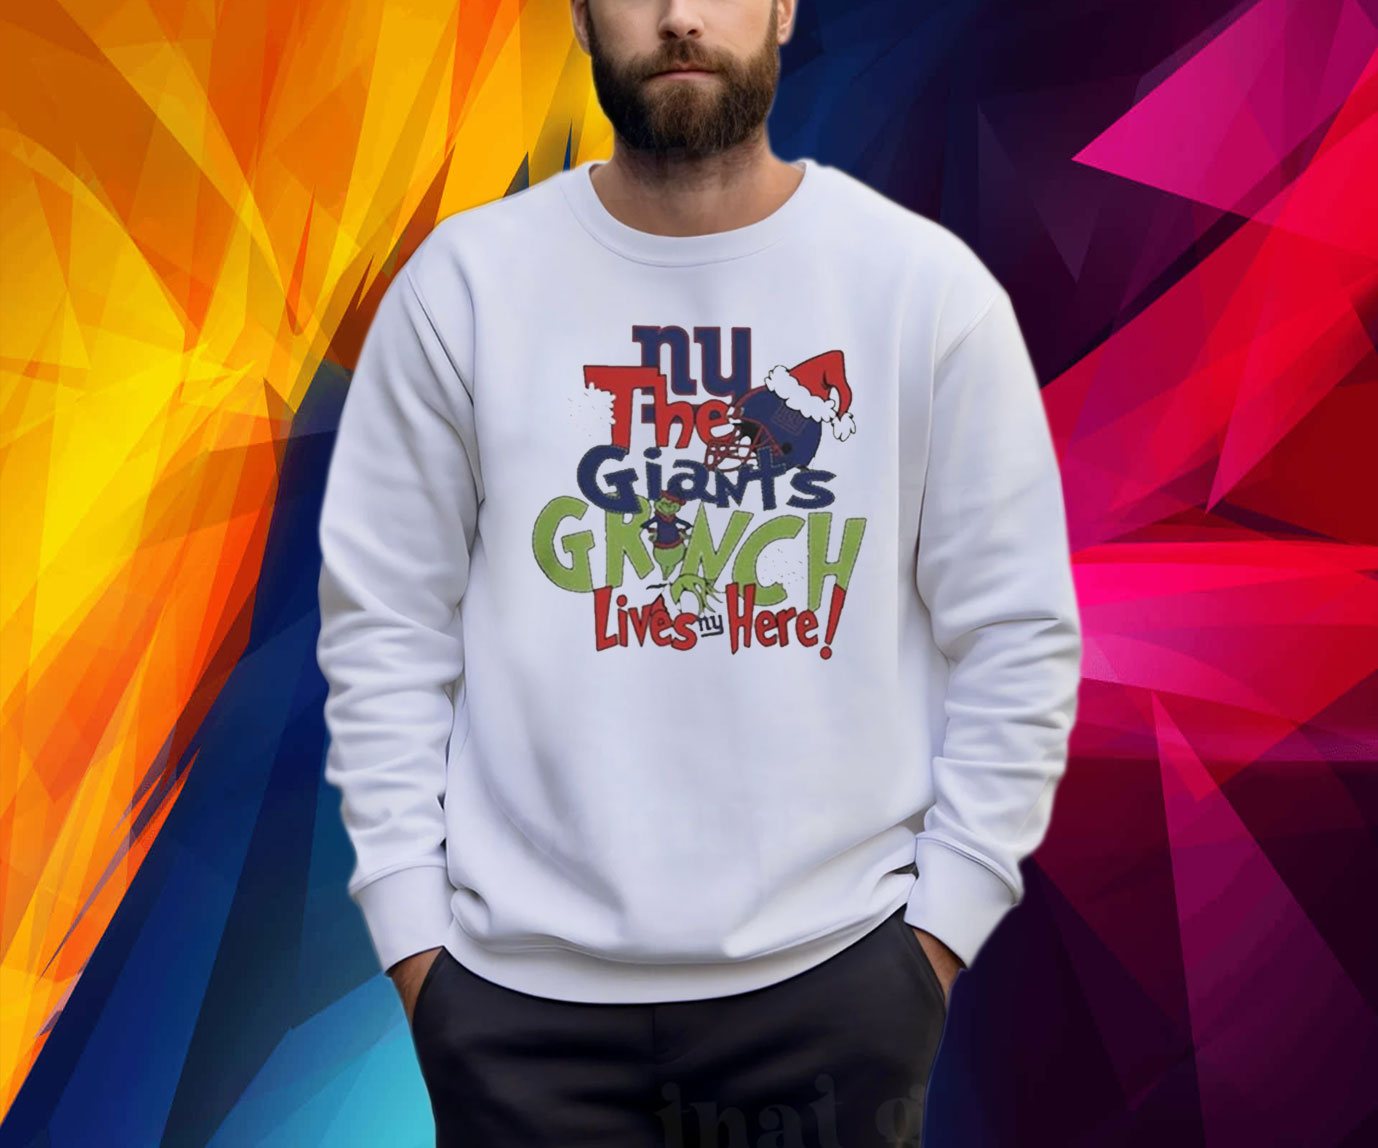 The New York Giants x Grinch Lives Here Christmas Shirt